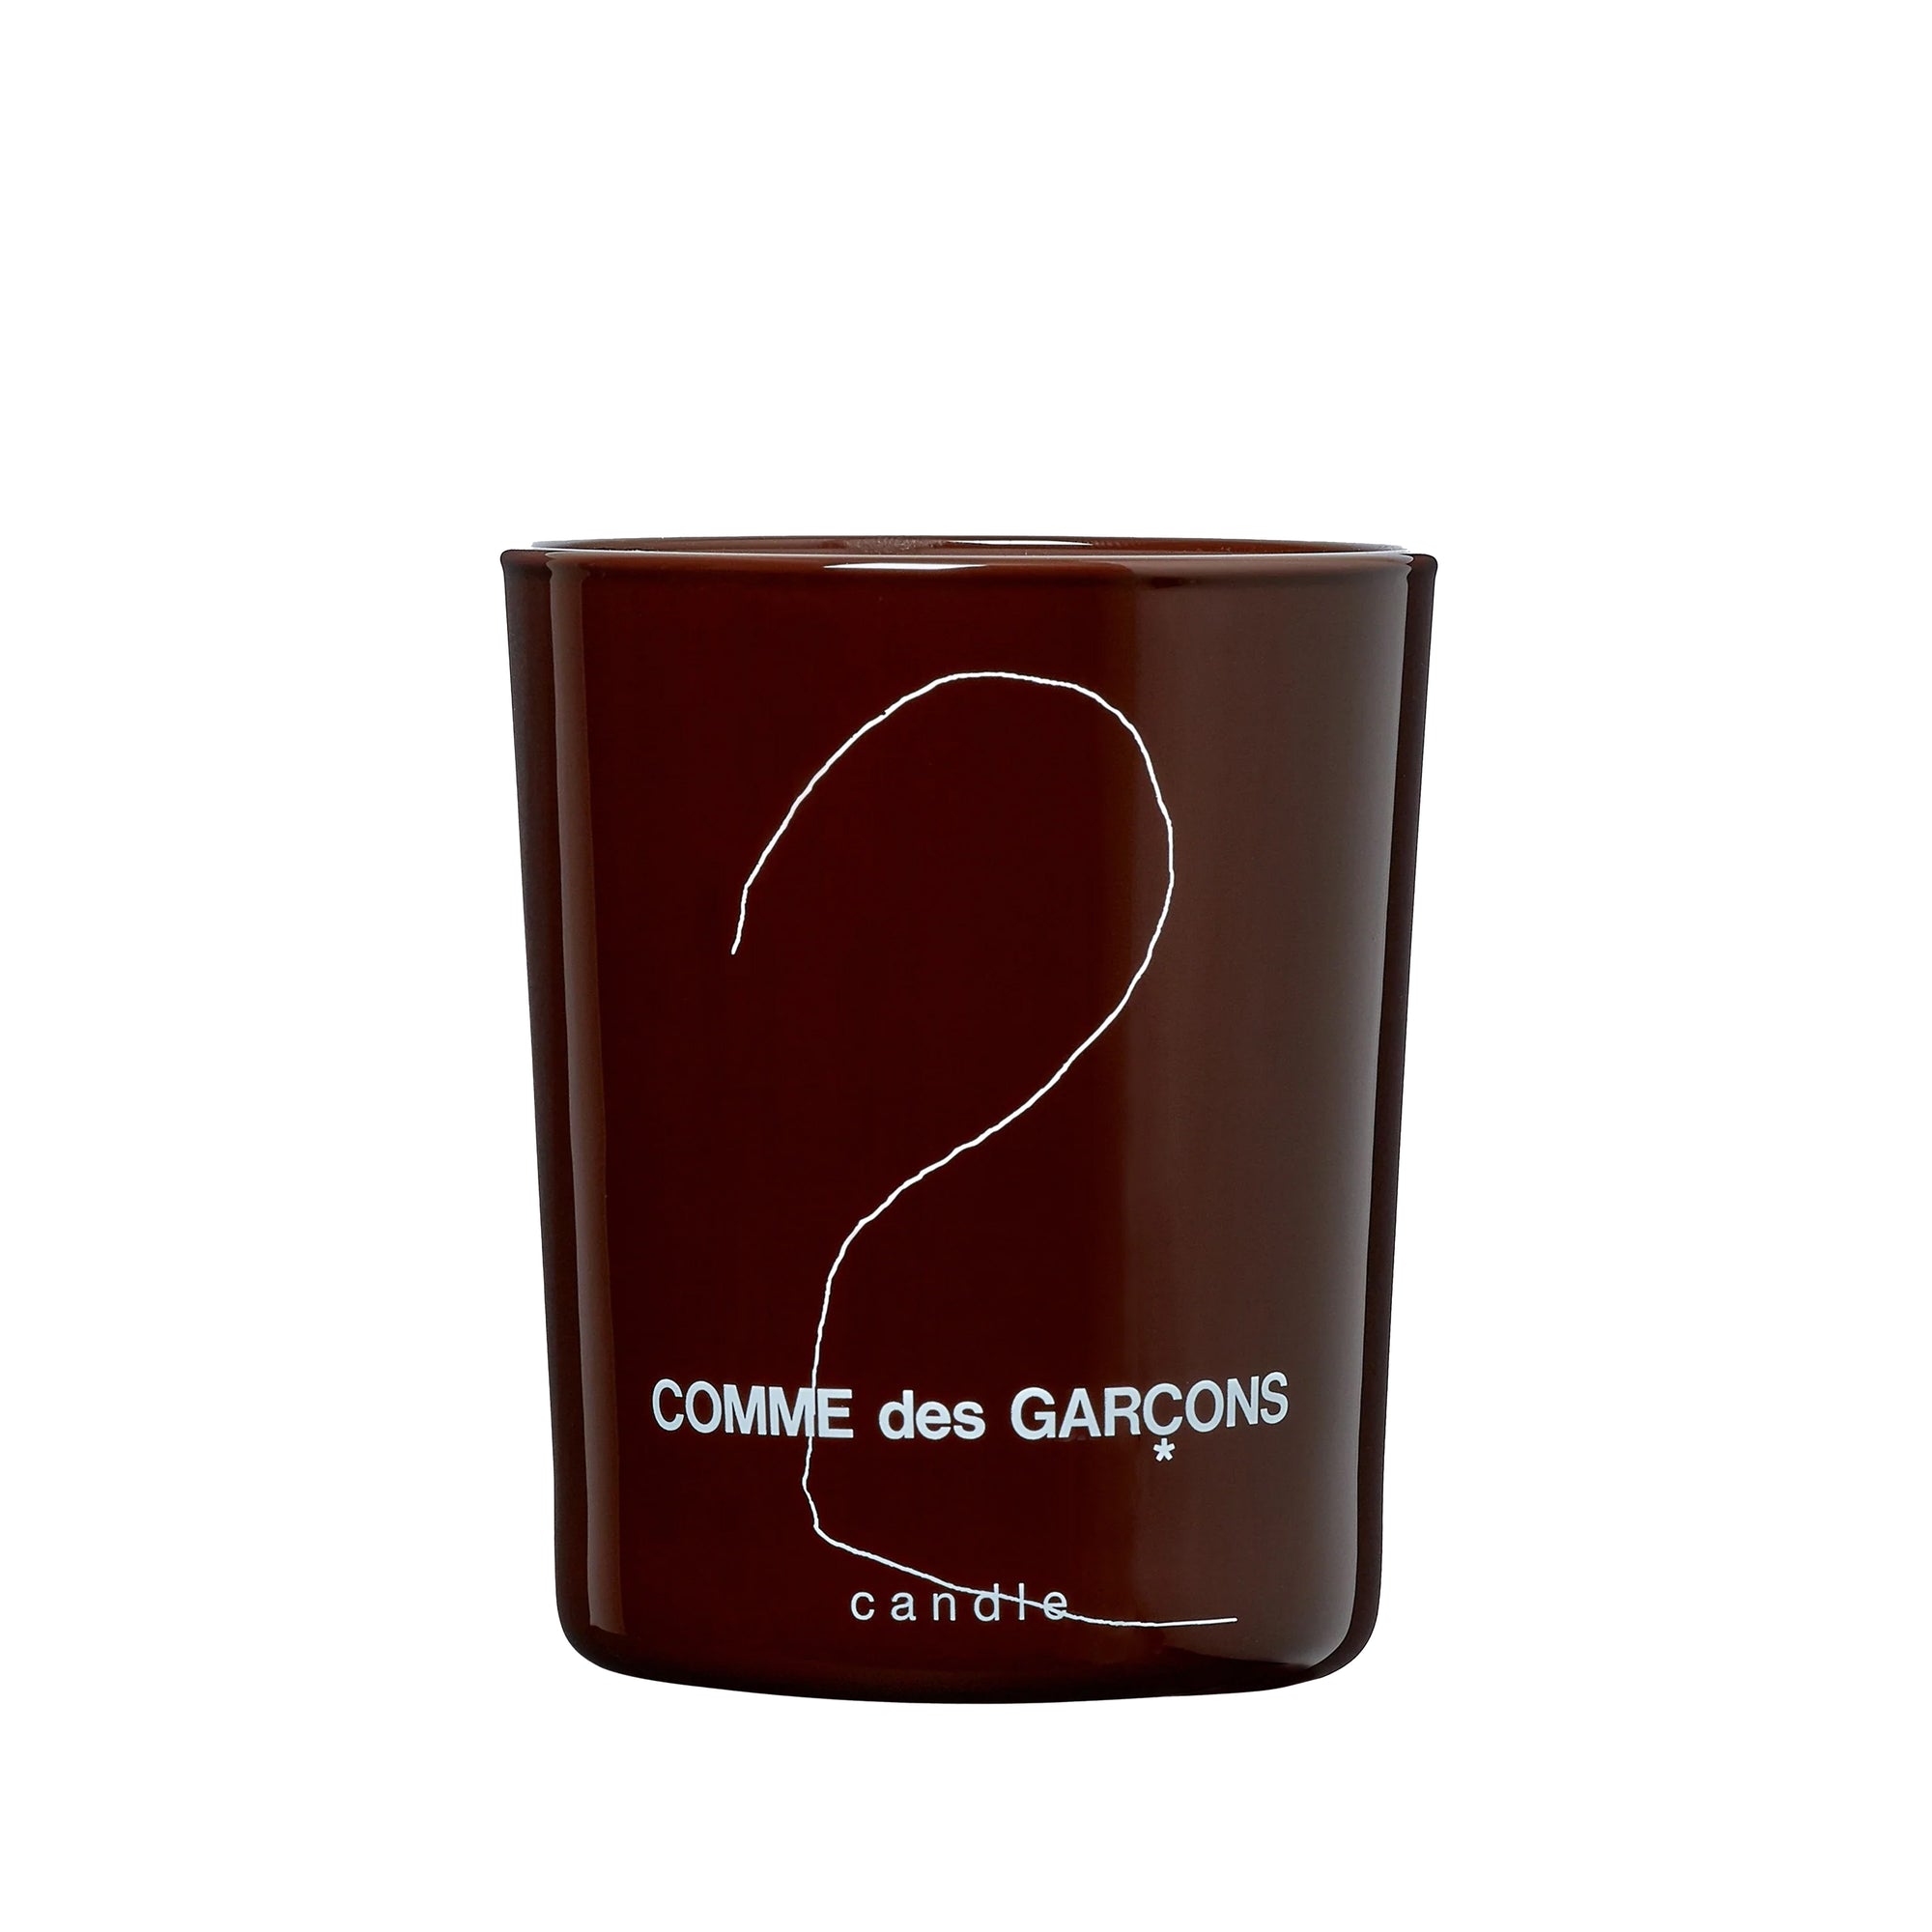 CDG Parfum - CDG2 Candle - (150g) view 1